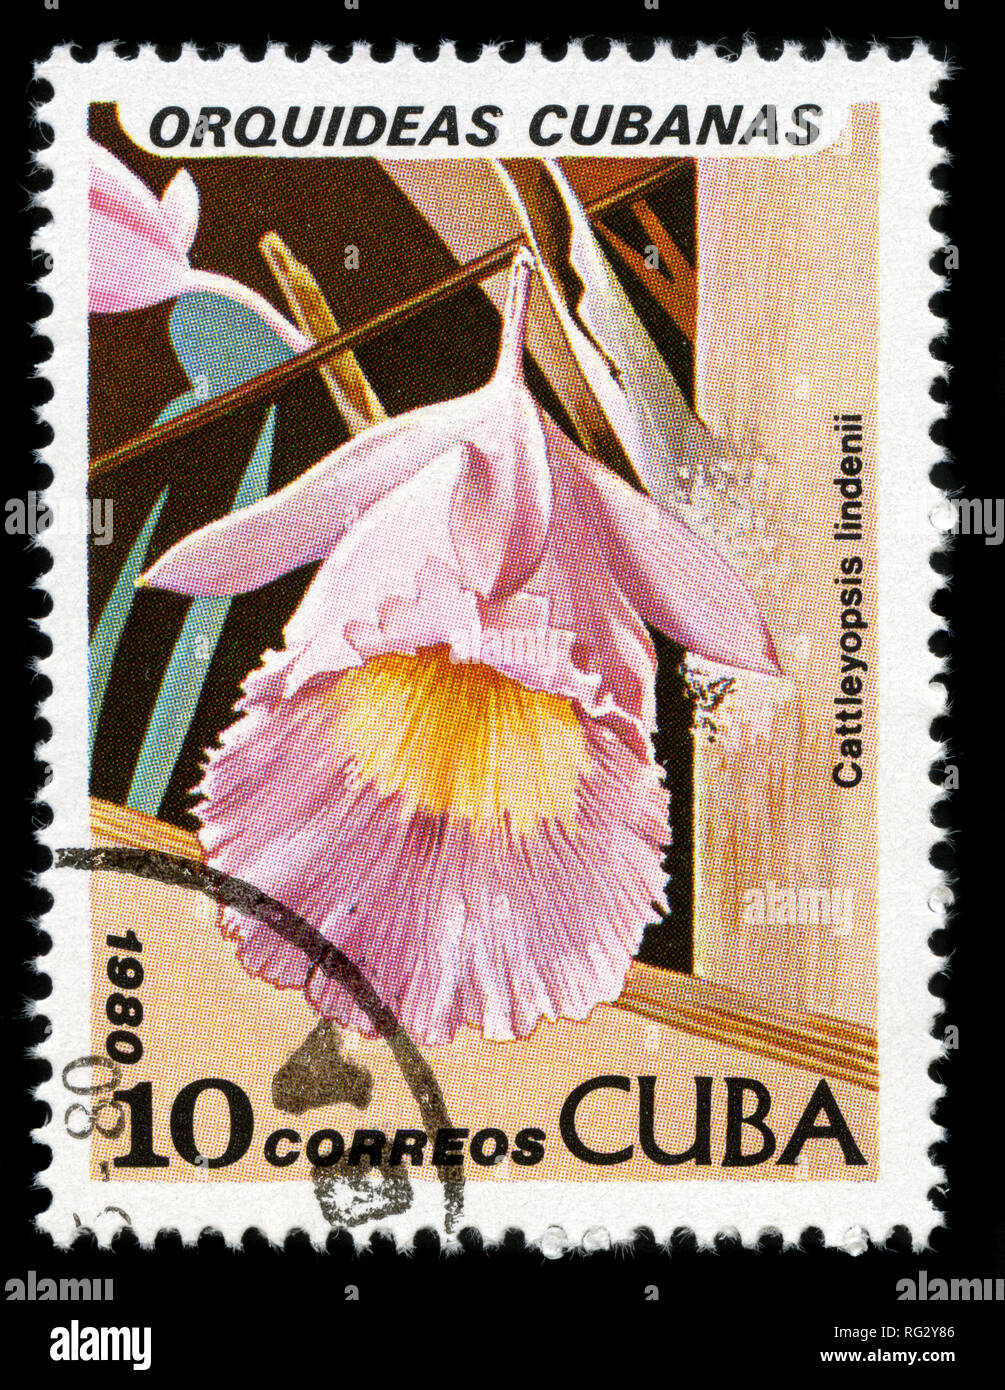 Postage stamp from Cuba in the Orchids series issued in 1980 Stock Photo